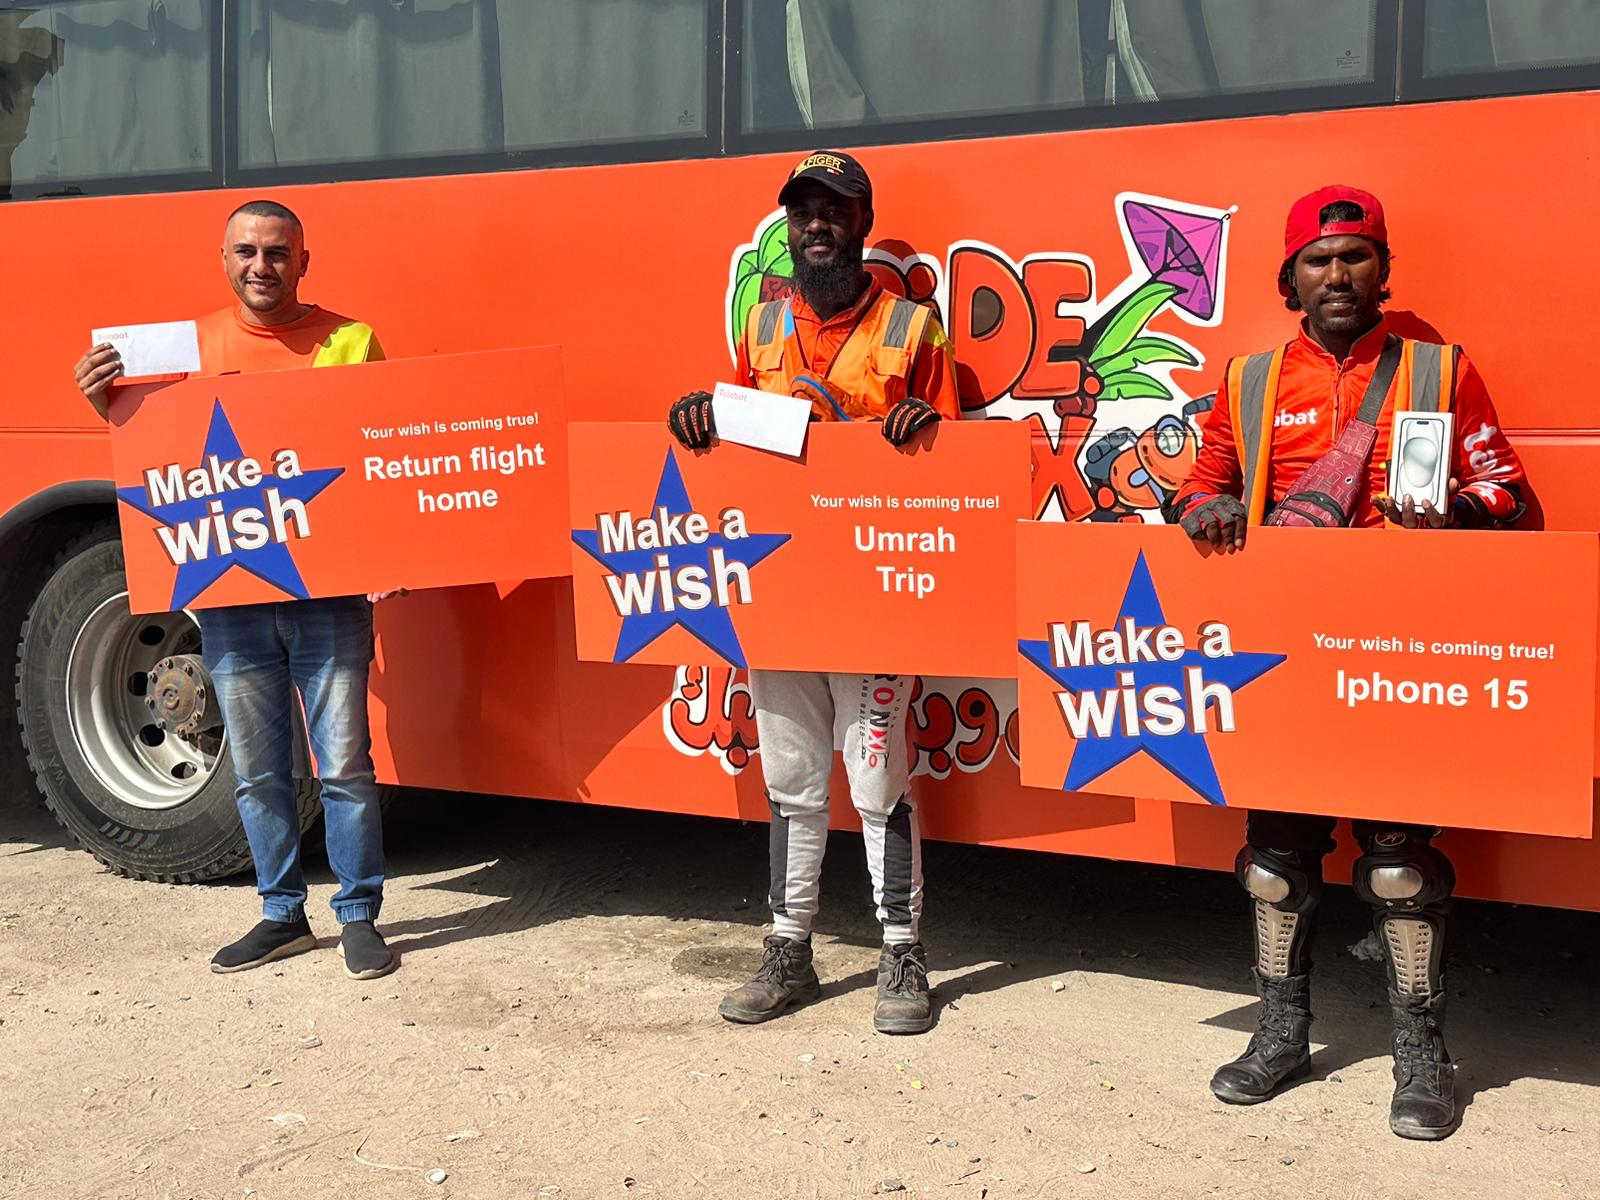 talabat Launches “Make a Wish” Campaign to Support Delivery Riders and  Uplift their Spirits – ARAB TIMES – KUWAIT NEWS